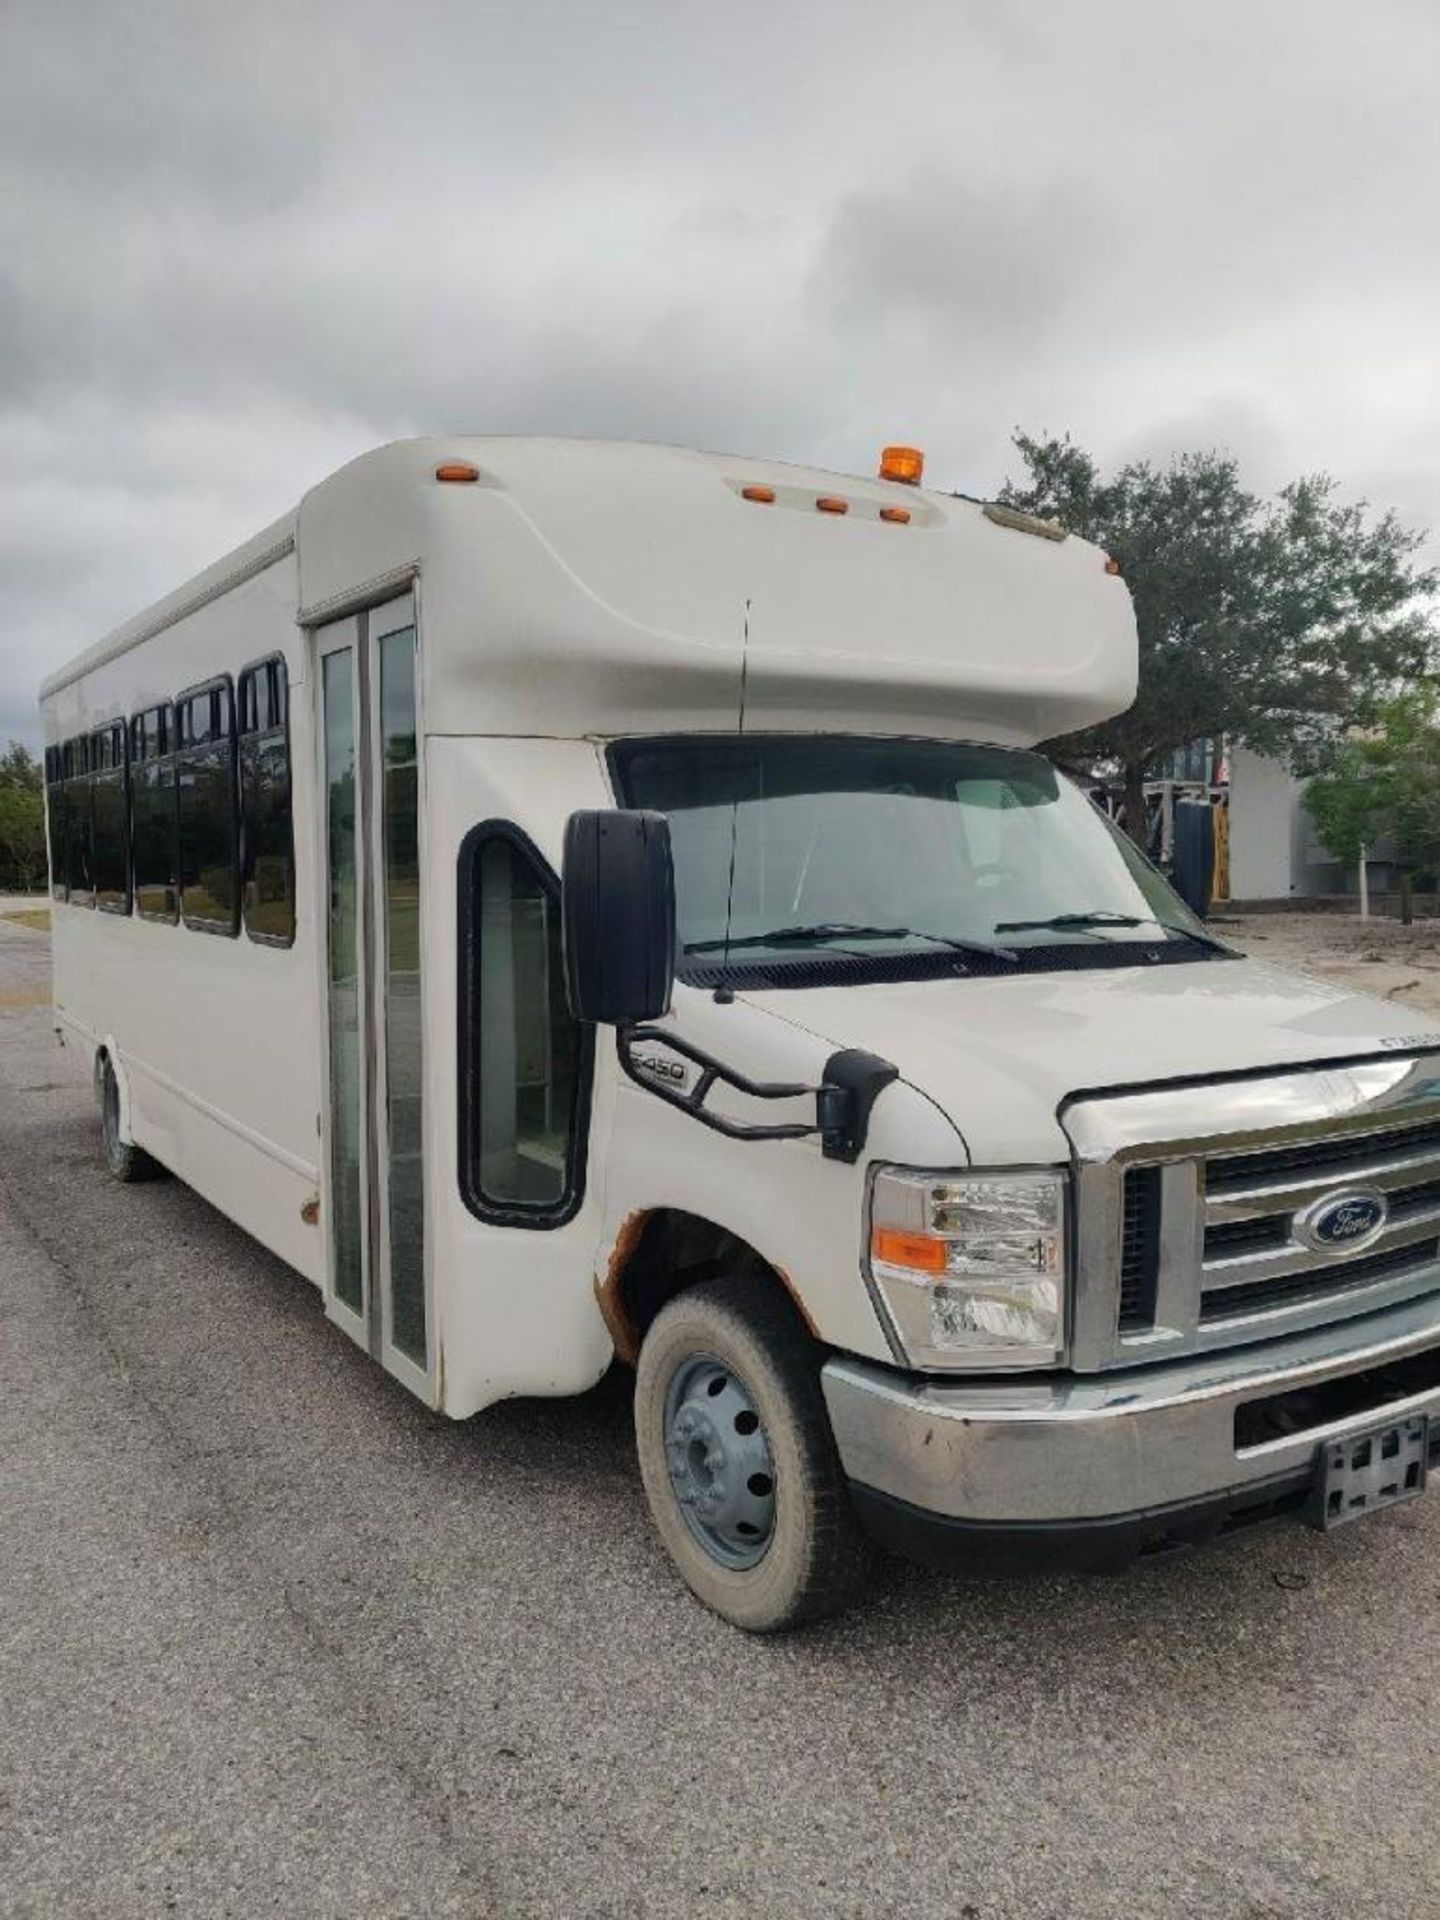 2018 FORD ECONOLINE 450 SHUTTLE BUS, GAS AUTOMATIC, 28 PASSENGER SEATING, APPROX 14500 GVWR, - Image 5 of 31